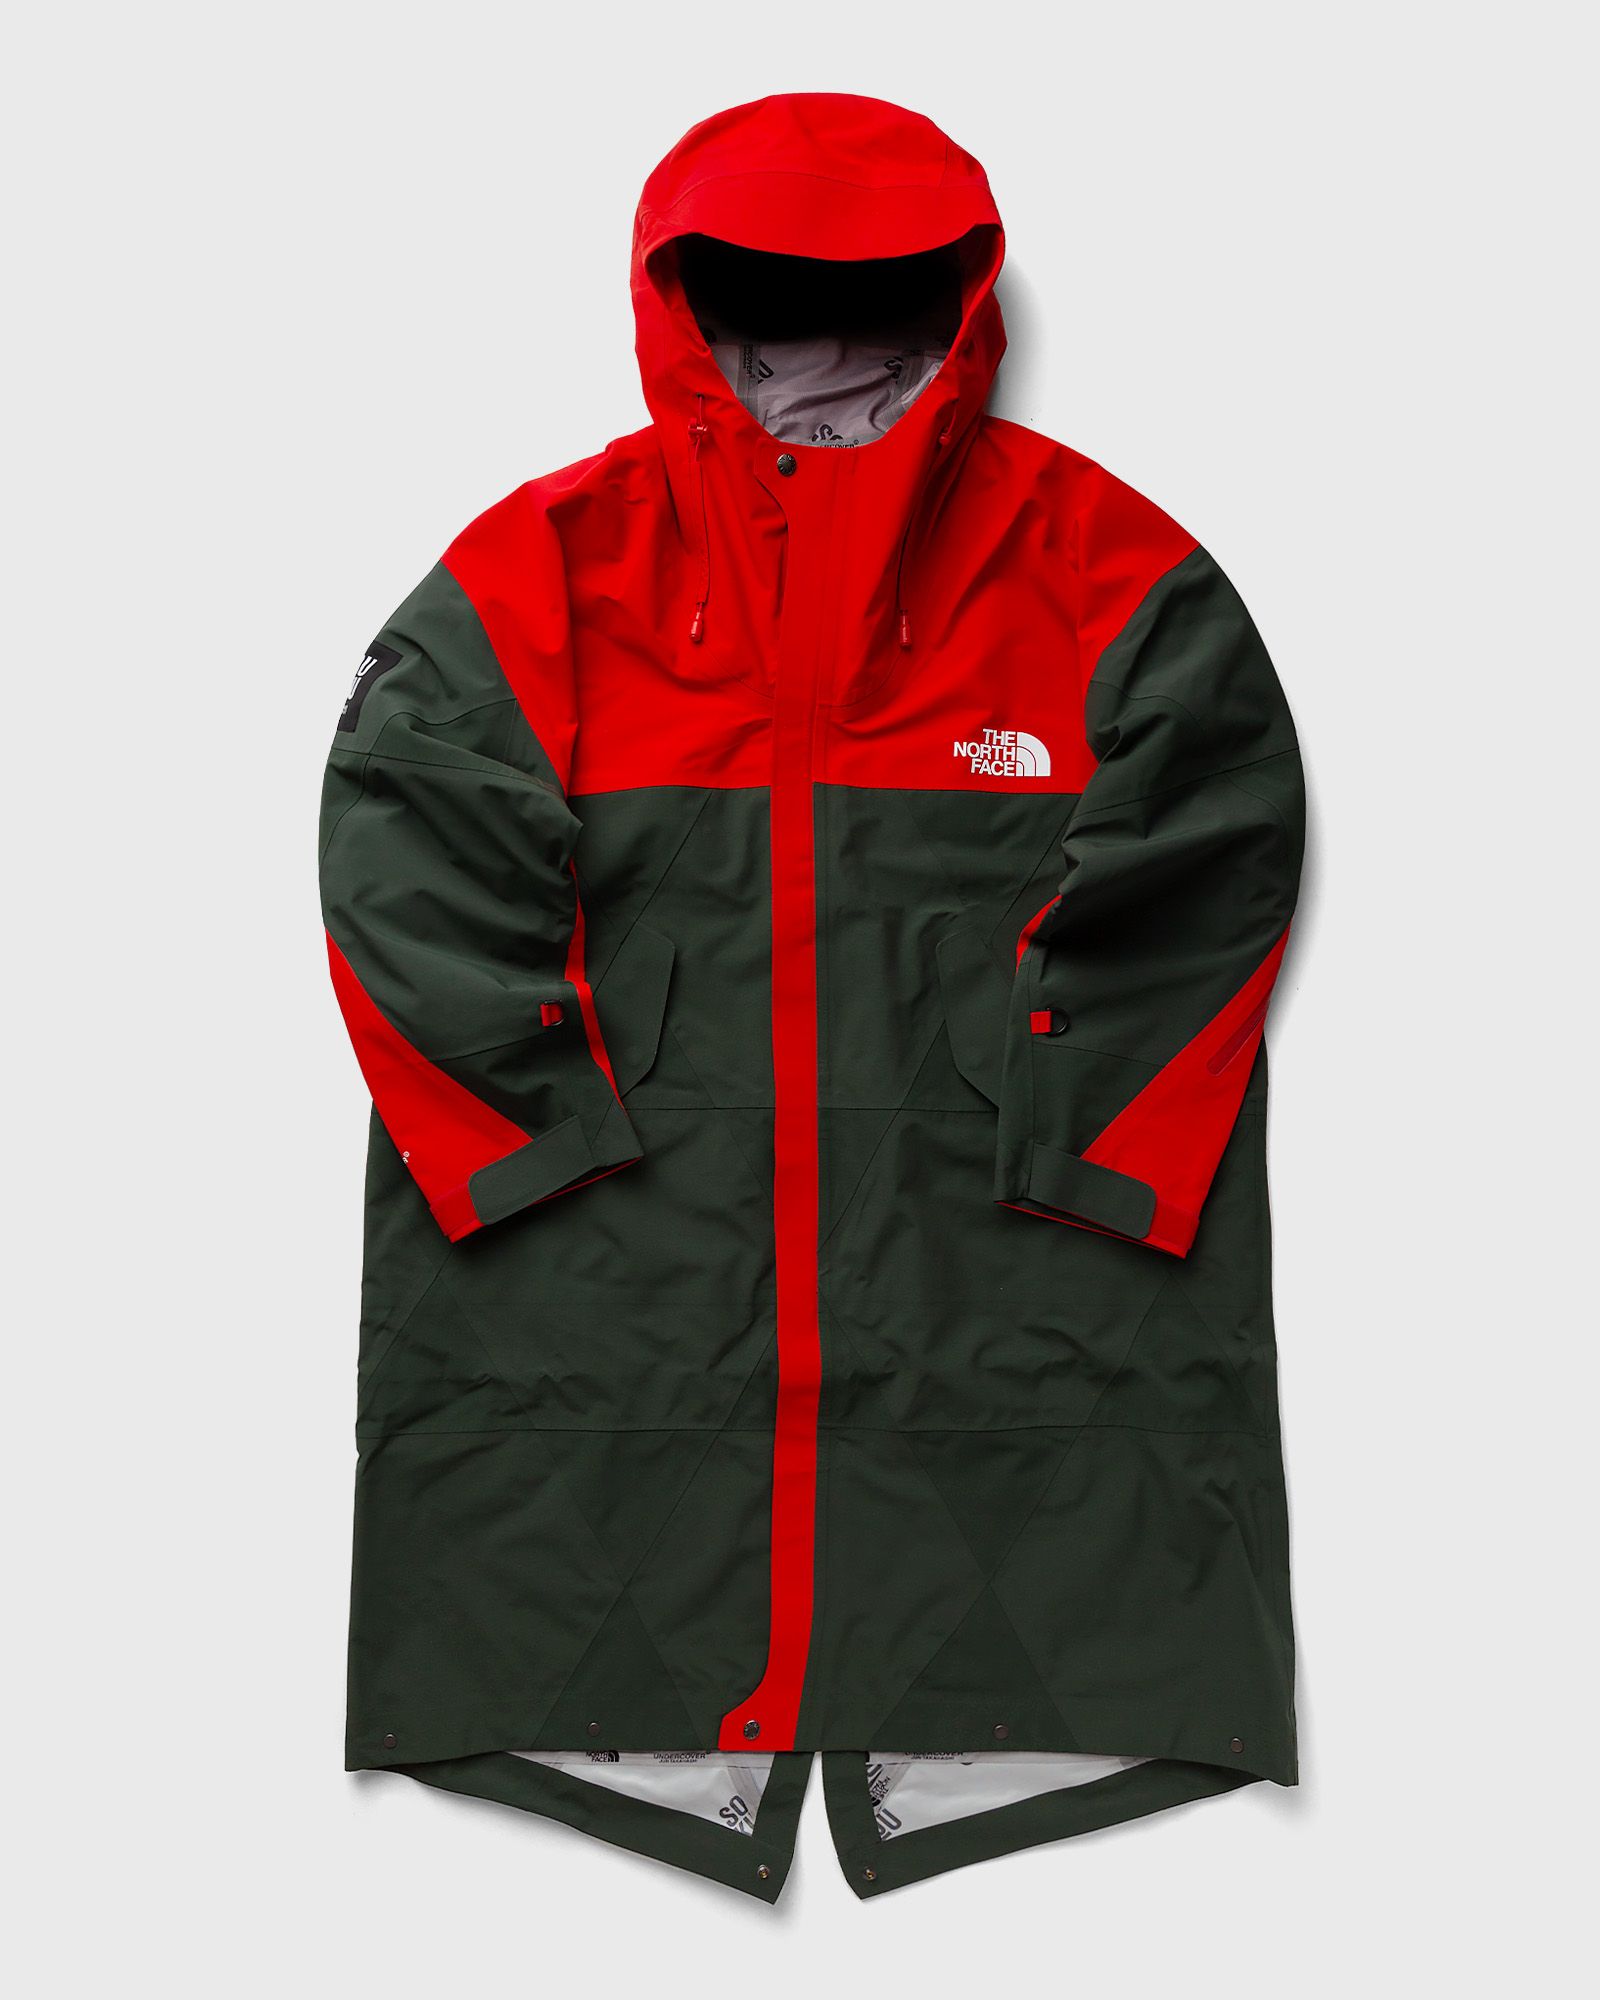 The North Face - x undercover geodesic shell jacket men shell jackets green|red in größe:xl